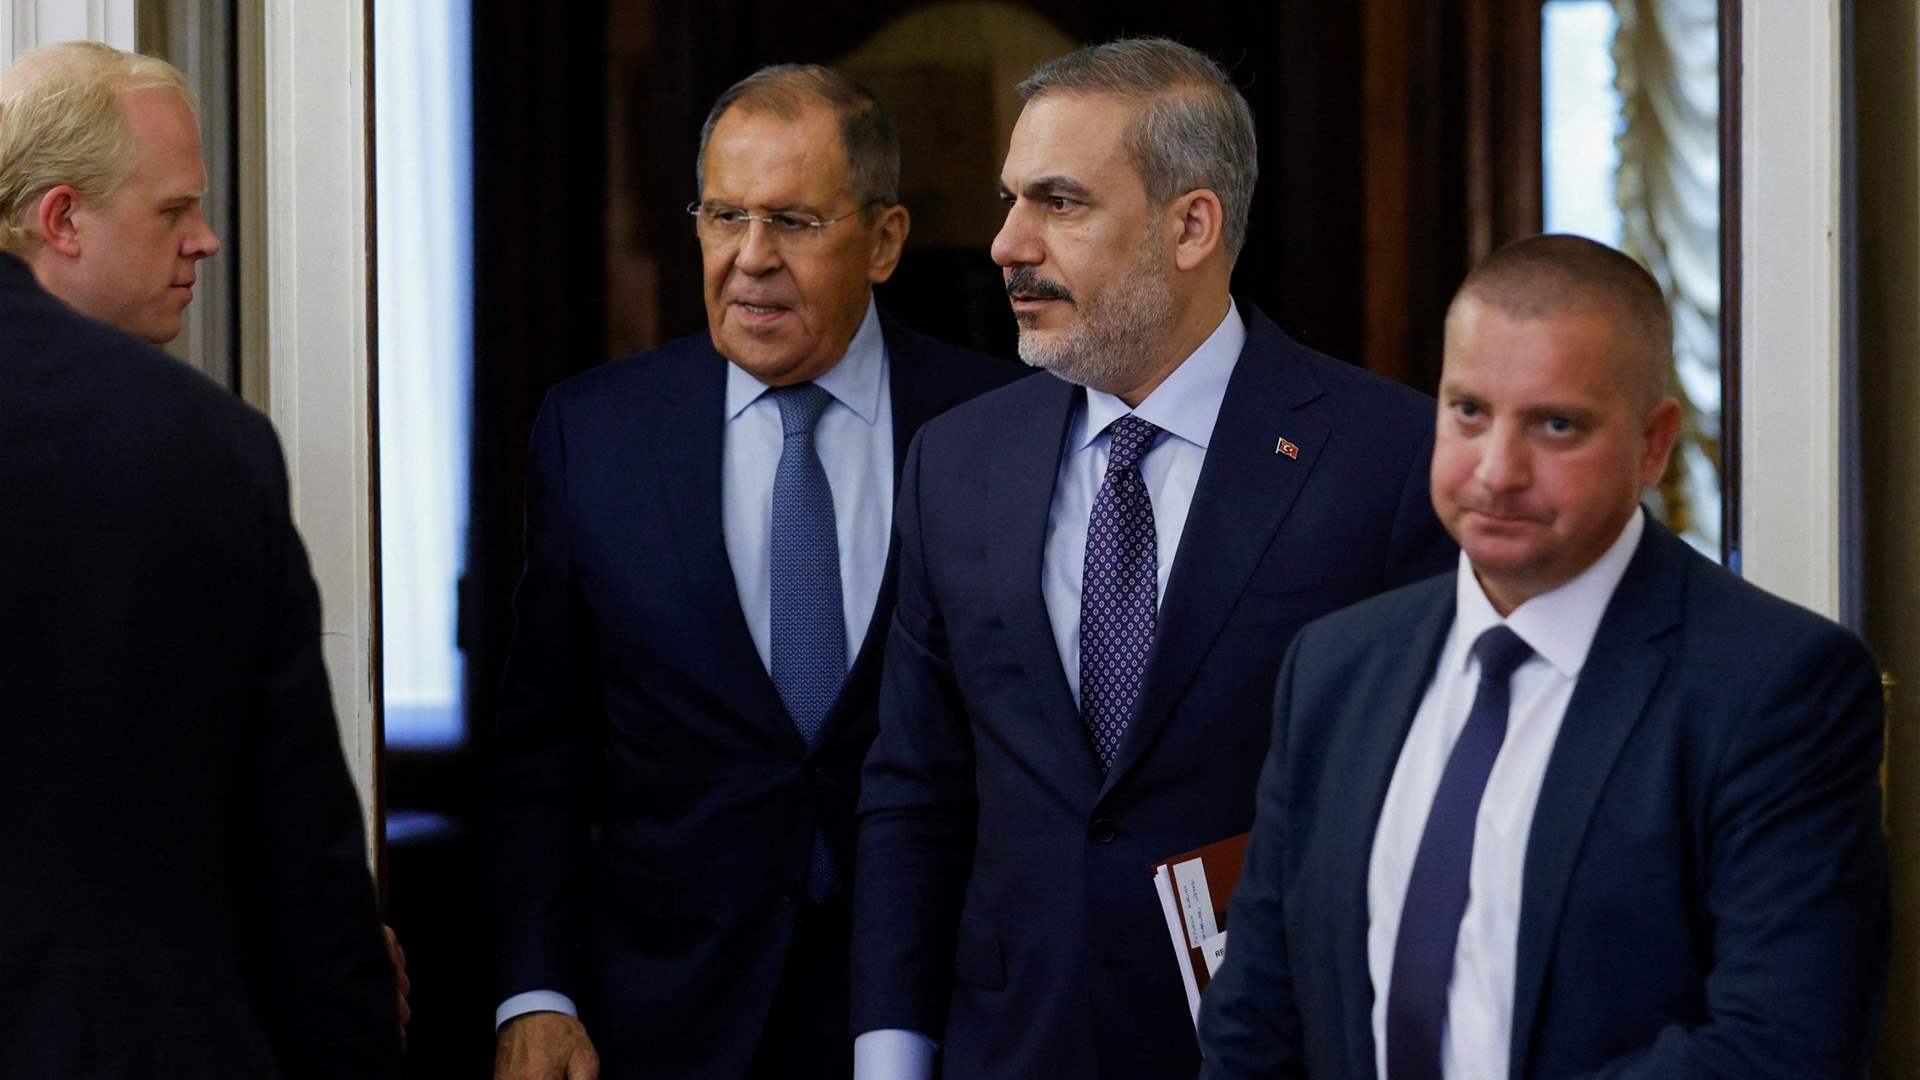 Russian and Turkish foreign ministers discuss situation in the MENA region